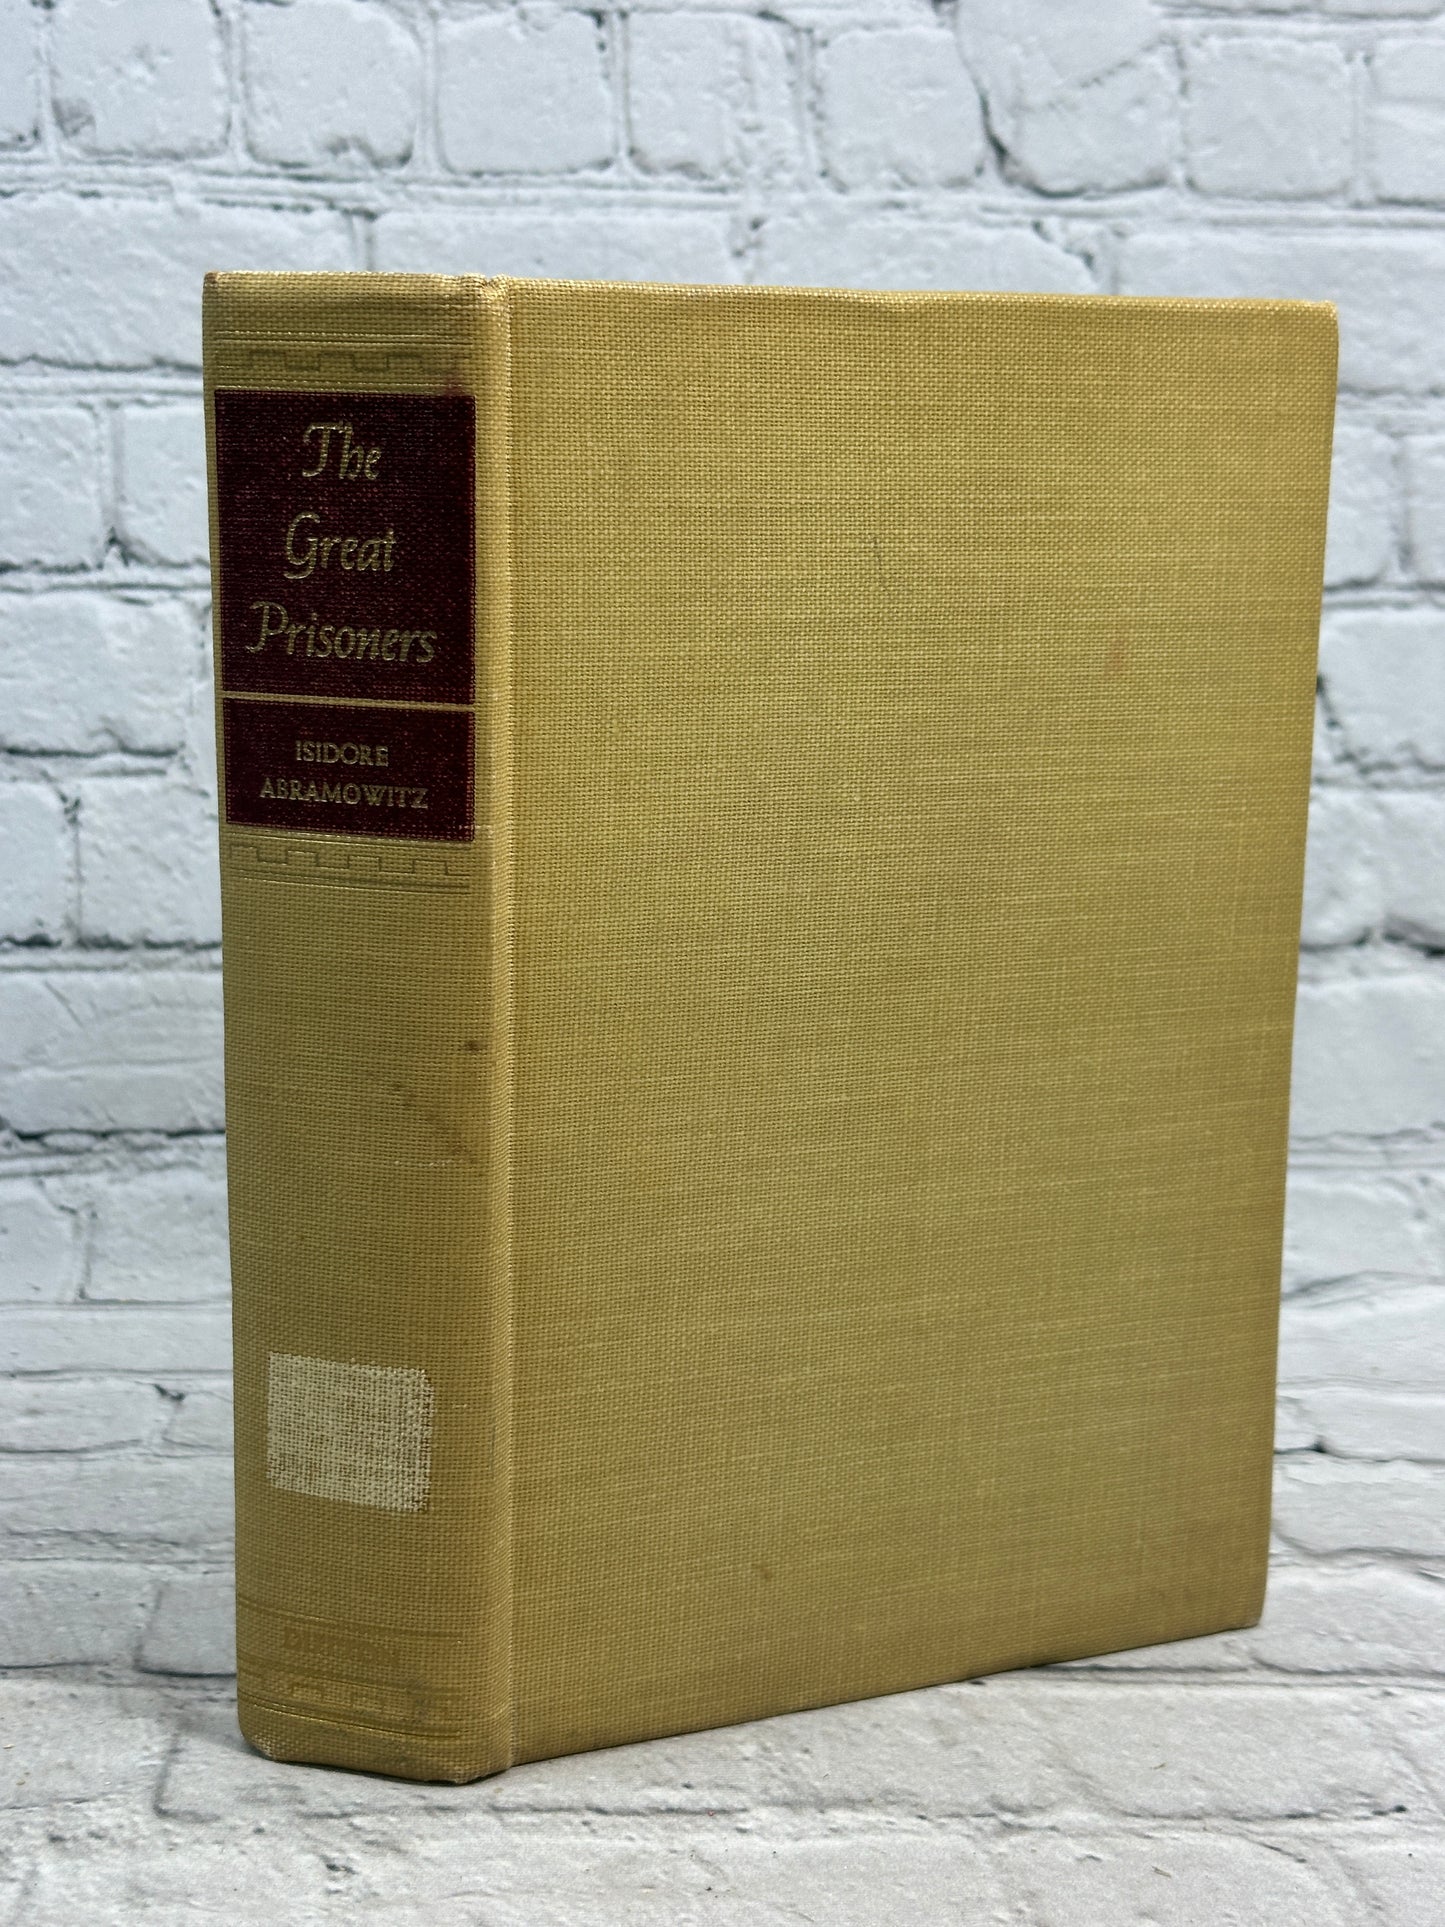 The Great Prisoners by Isidore Abramowtiz [1946 · First Edition]